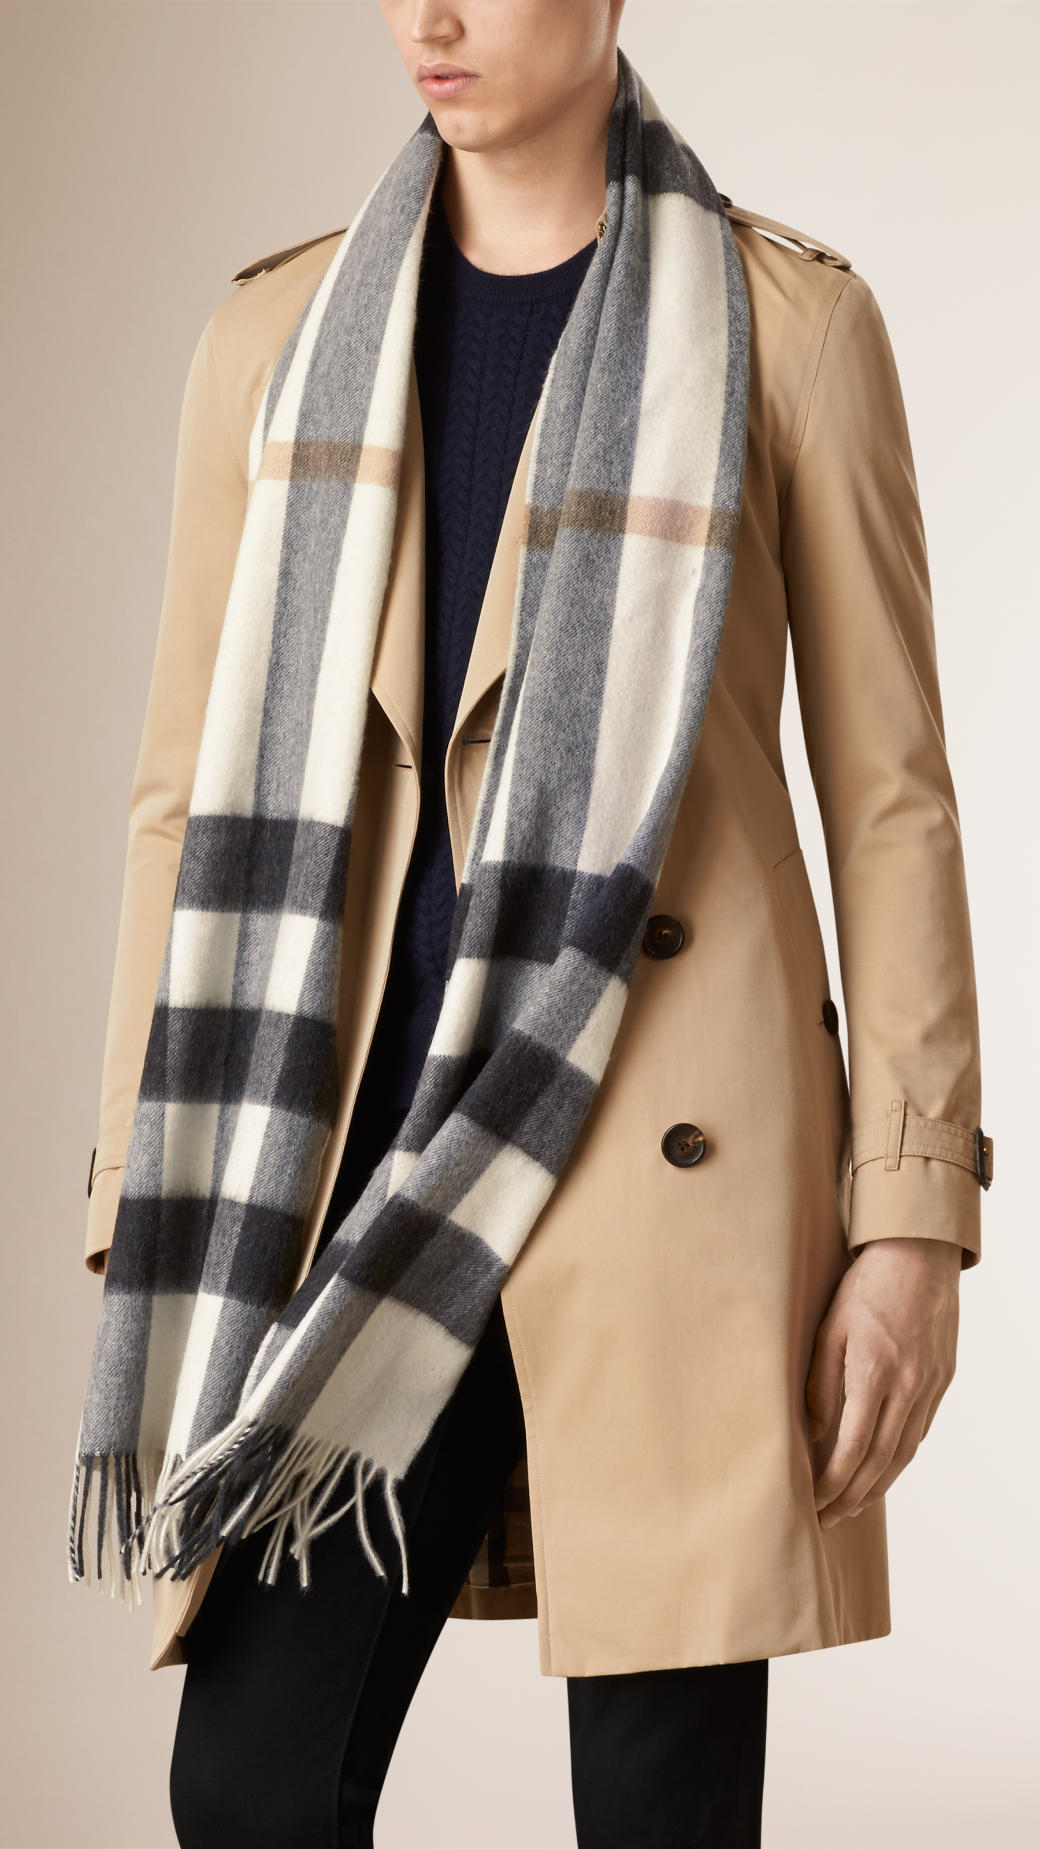 Burberry Giant Exploded Check Cashmere Scarf in Ivory Check (White) - Lyst